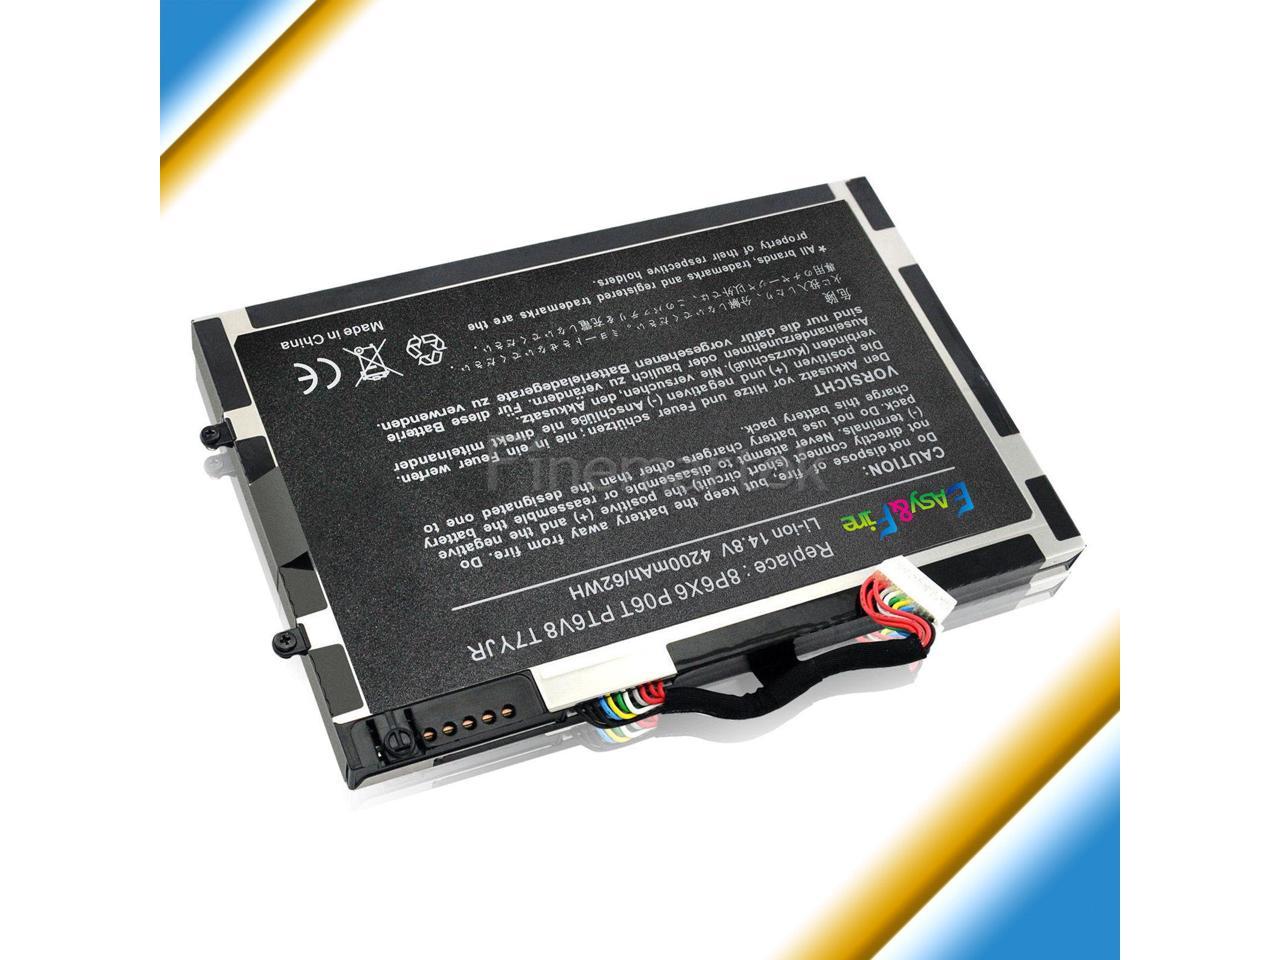 New 62wh Battery For Dell Alienware M11x M14x R1 R2 R3 8p6x6 P06t Pt6v8 T7yjr 08p6x6 Newegg Com